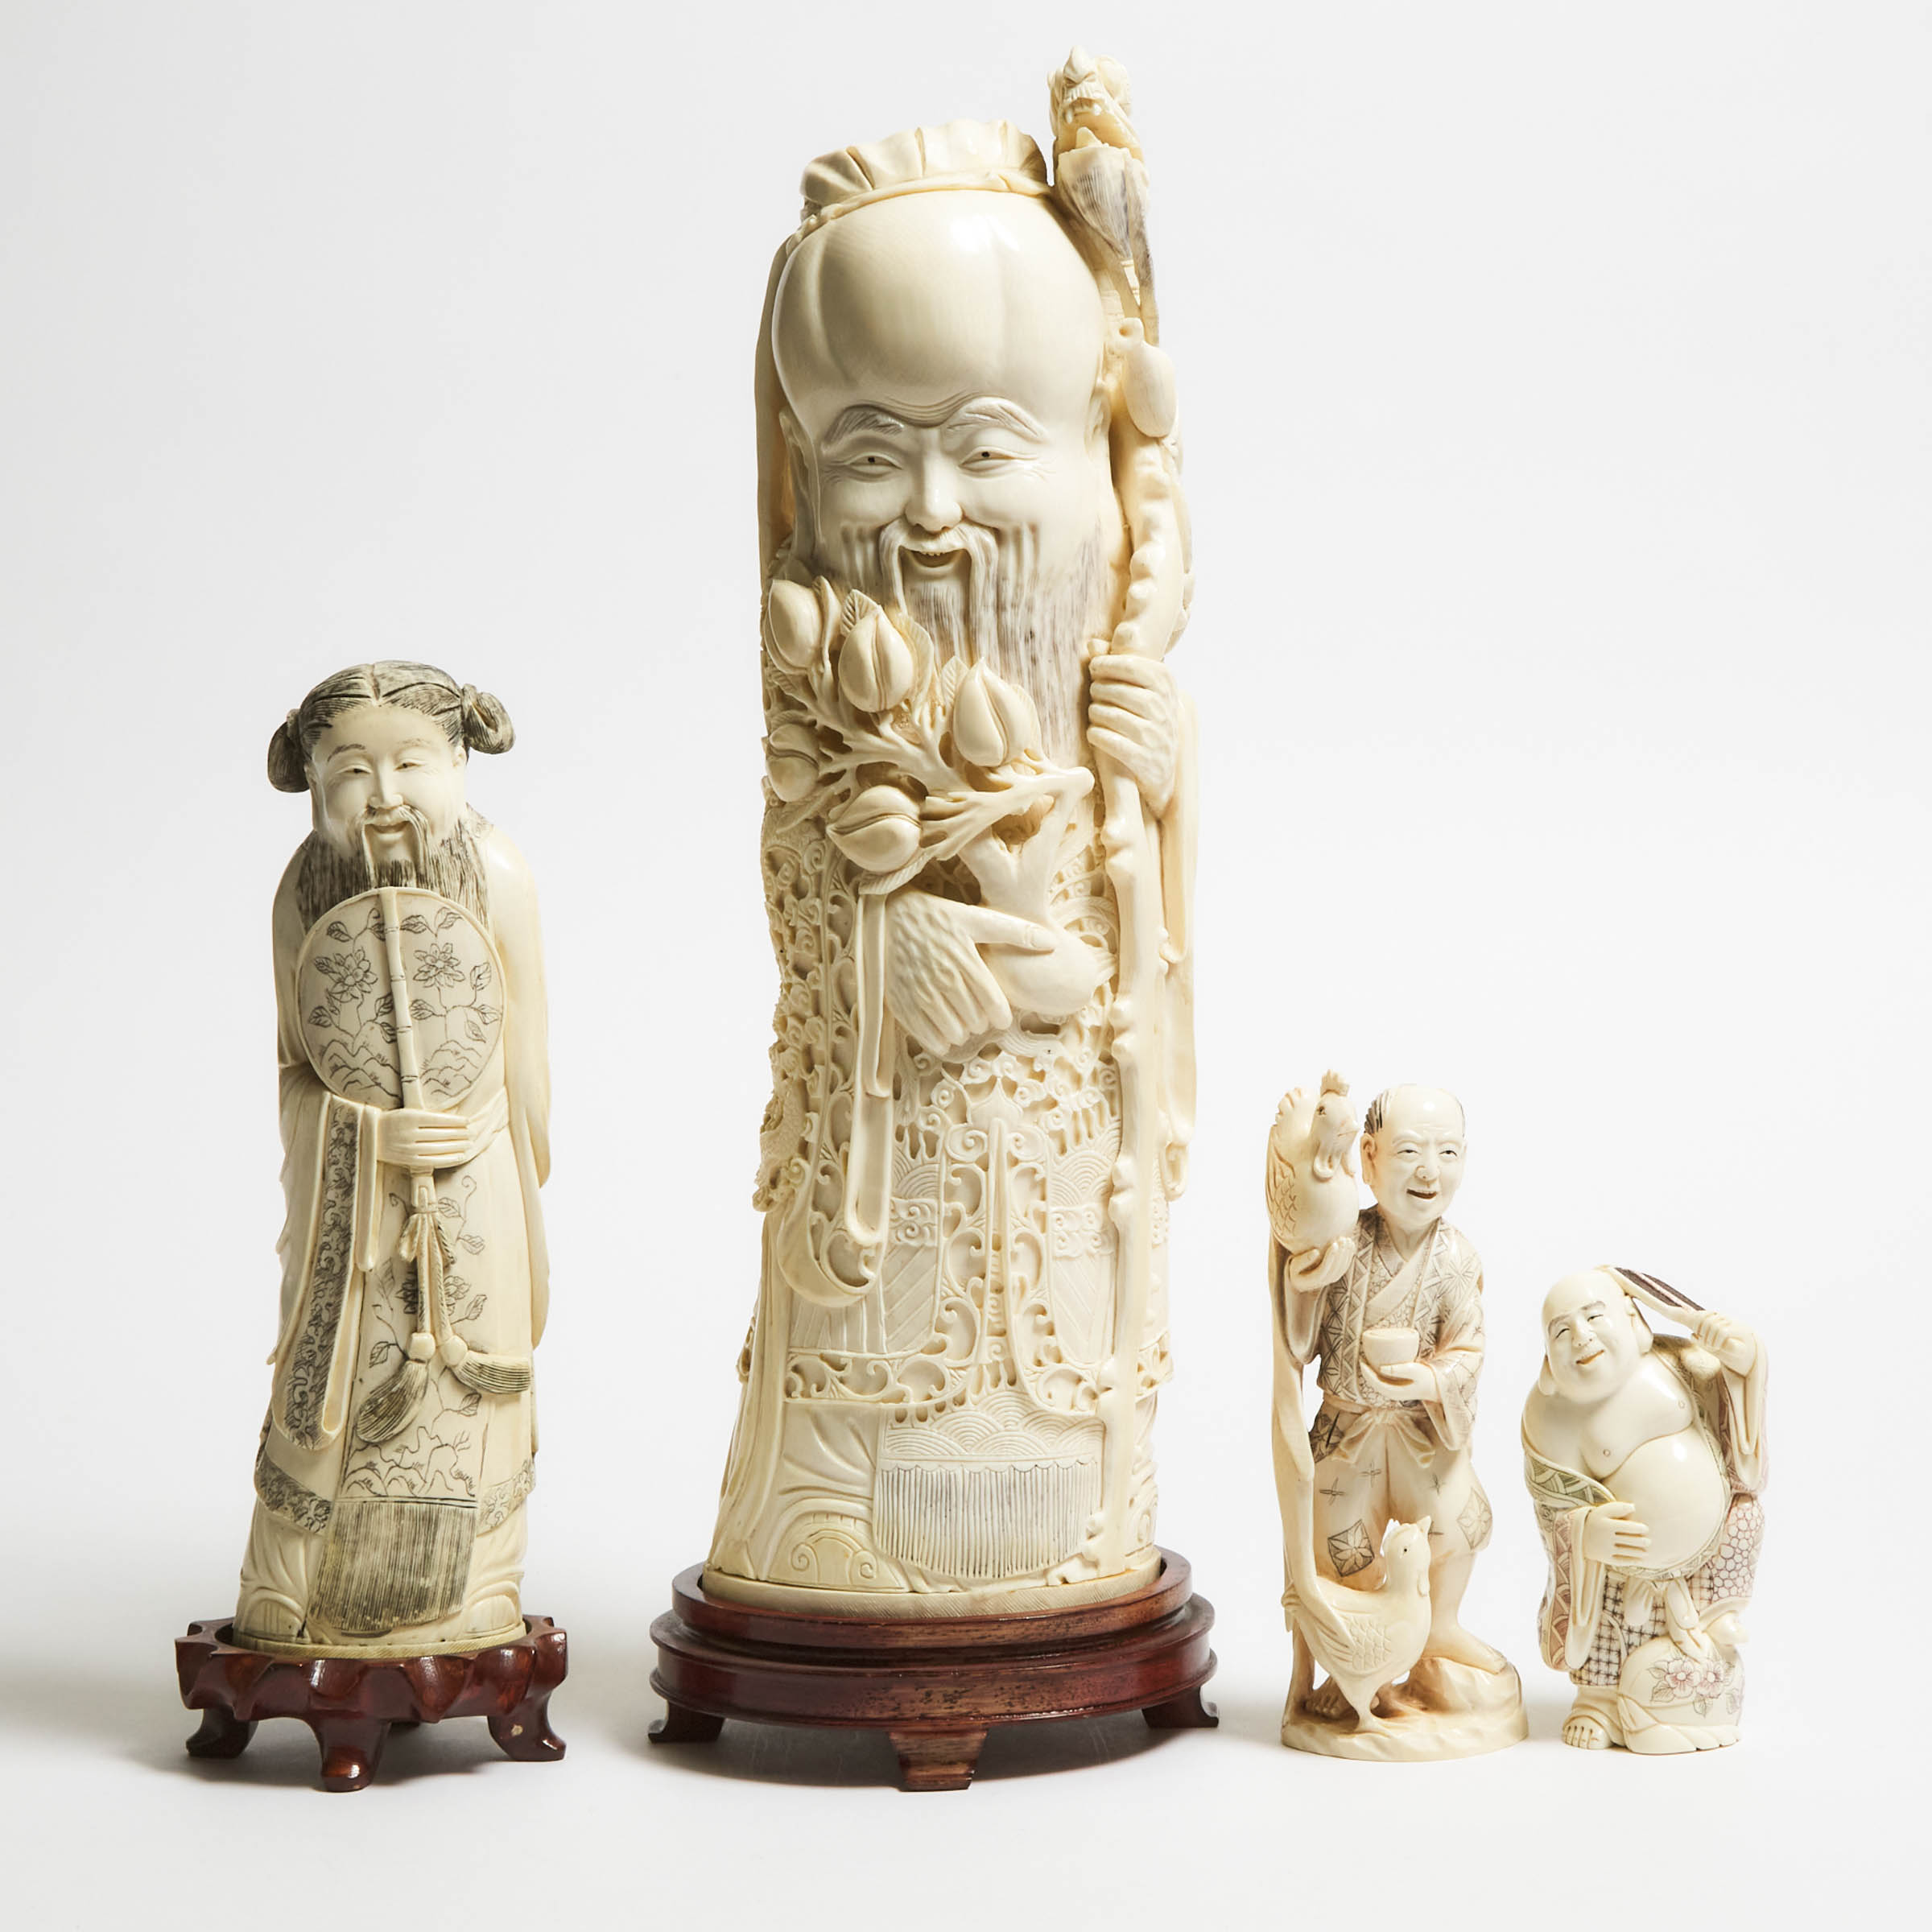 A Group of Four Ivory Figures, Early